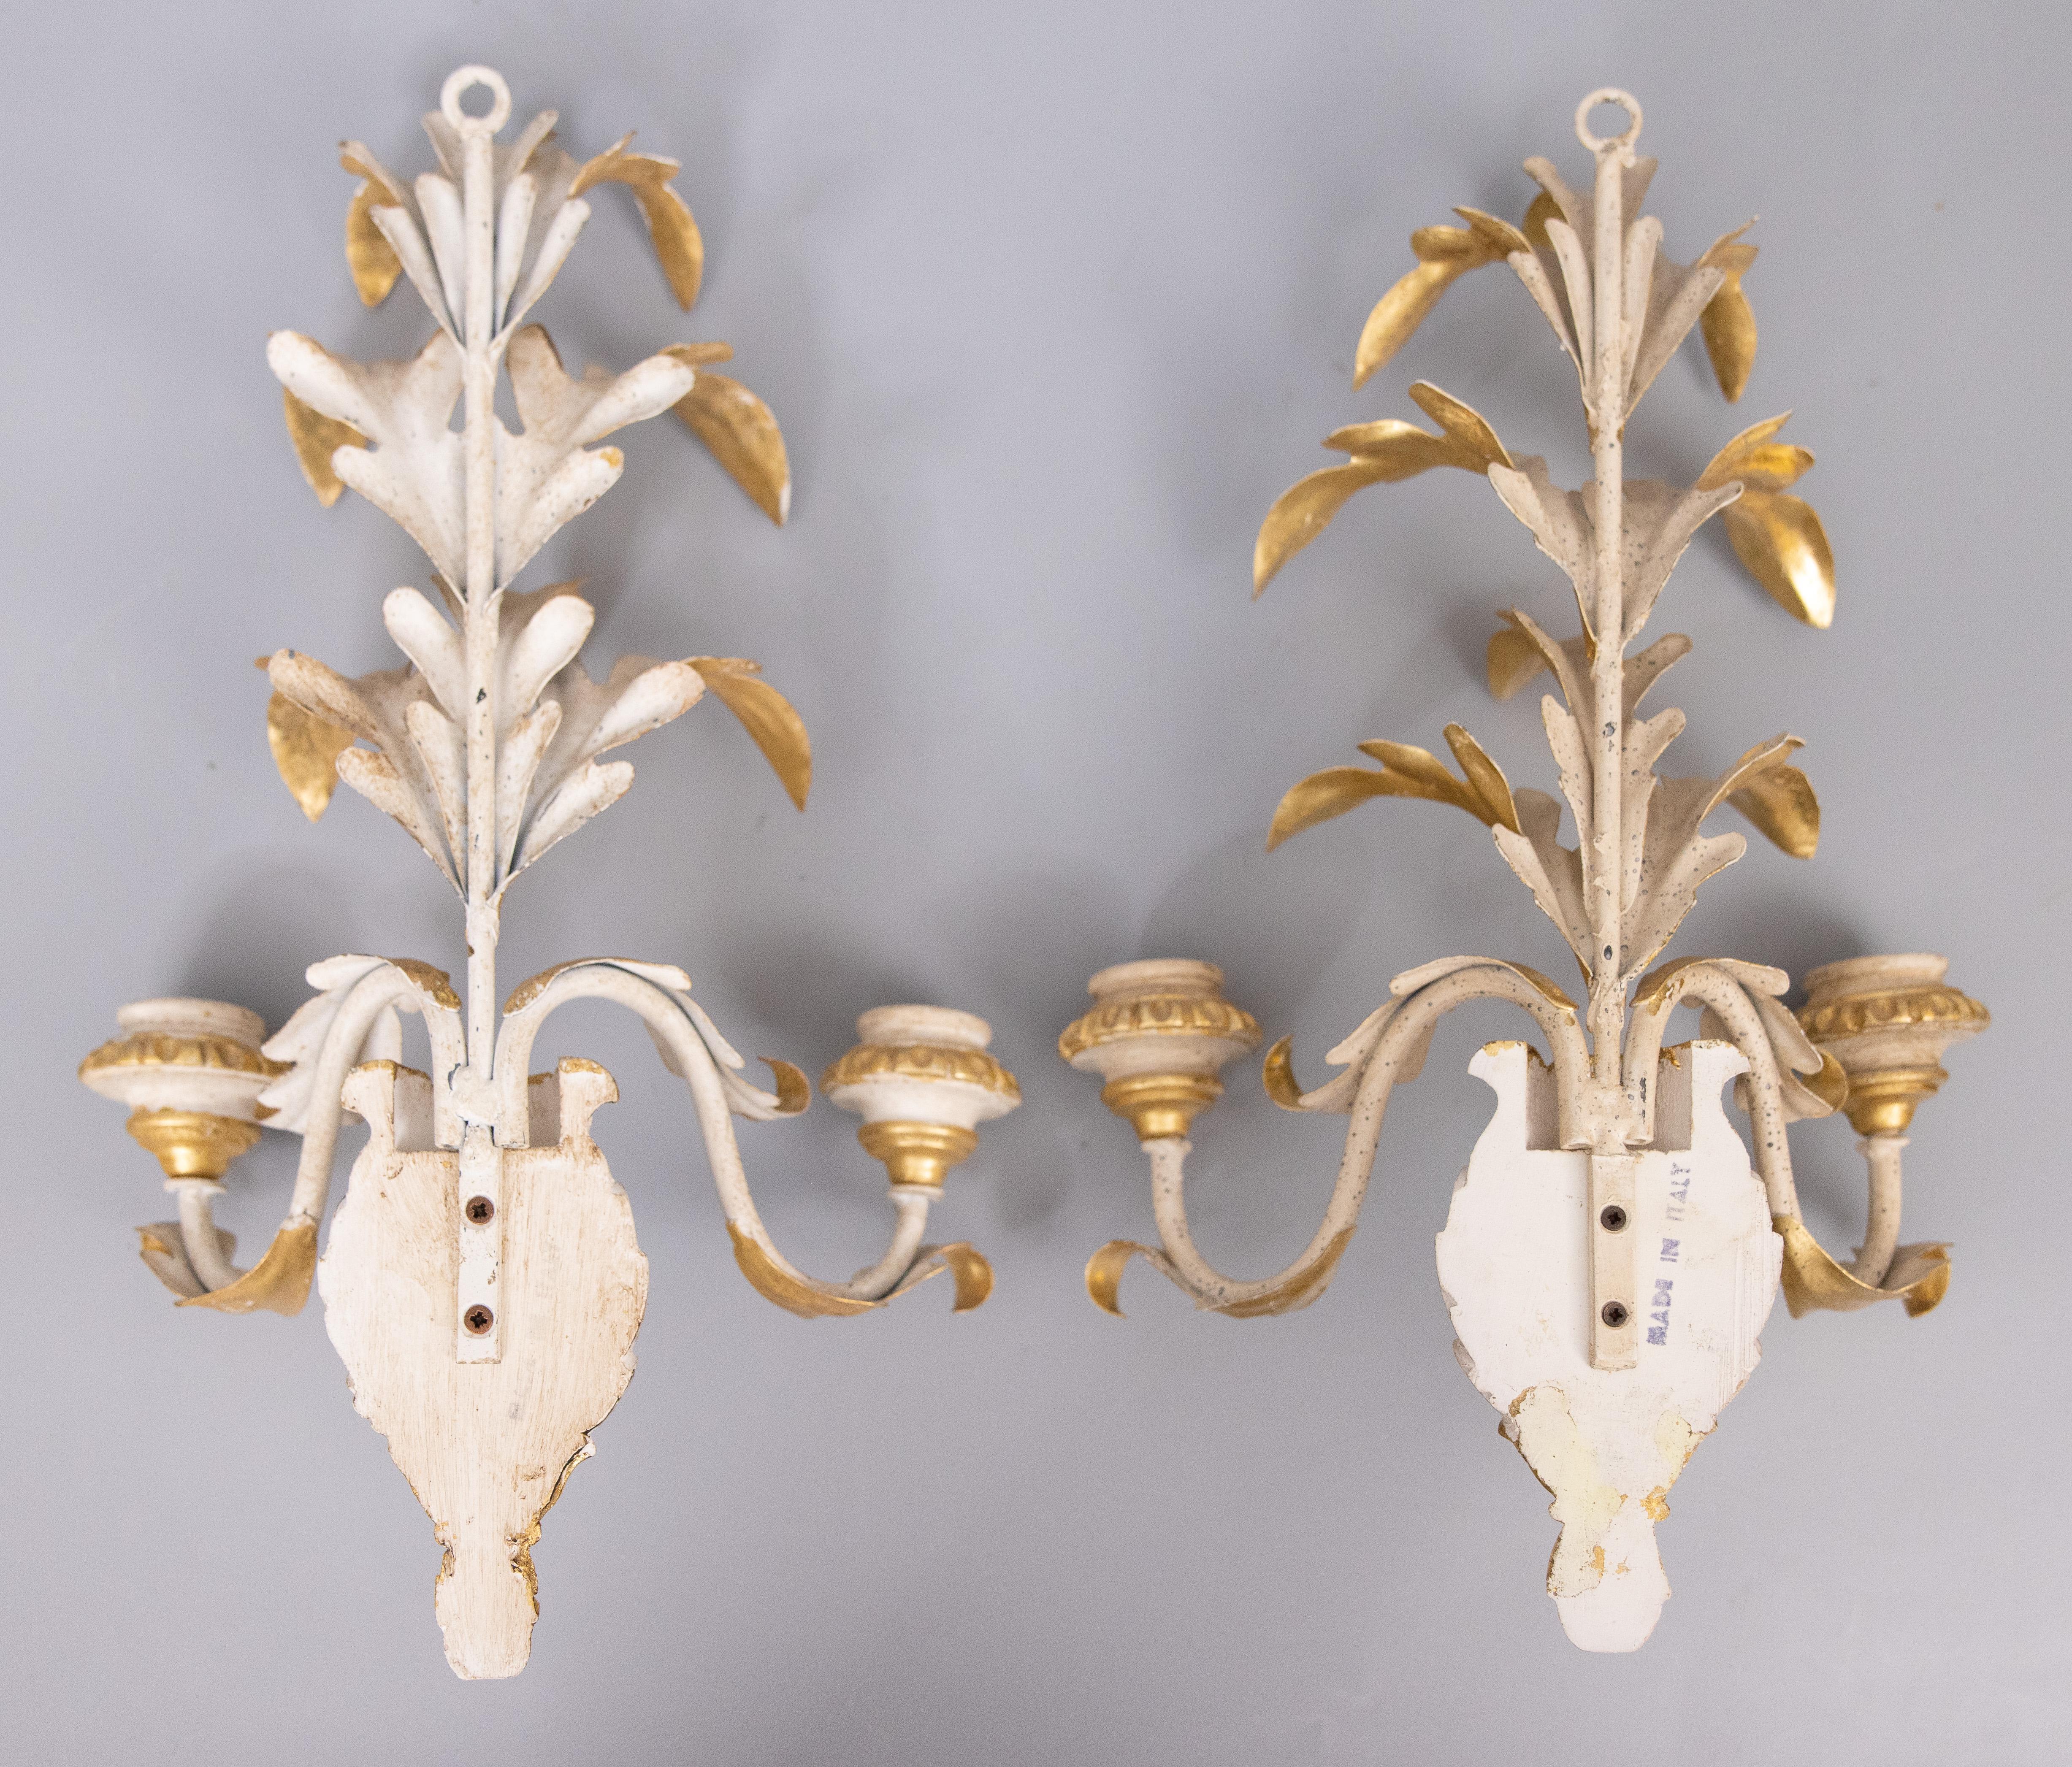 Pair of Mid-20th Century Italian Giltwood & Tole Pineapple Candle Sconces 4